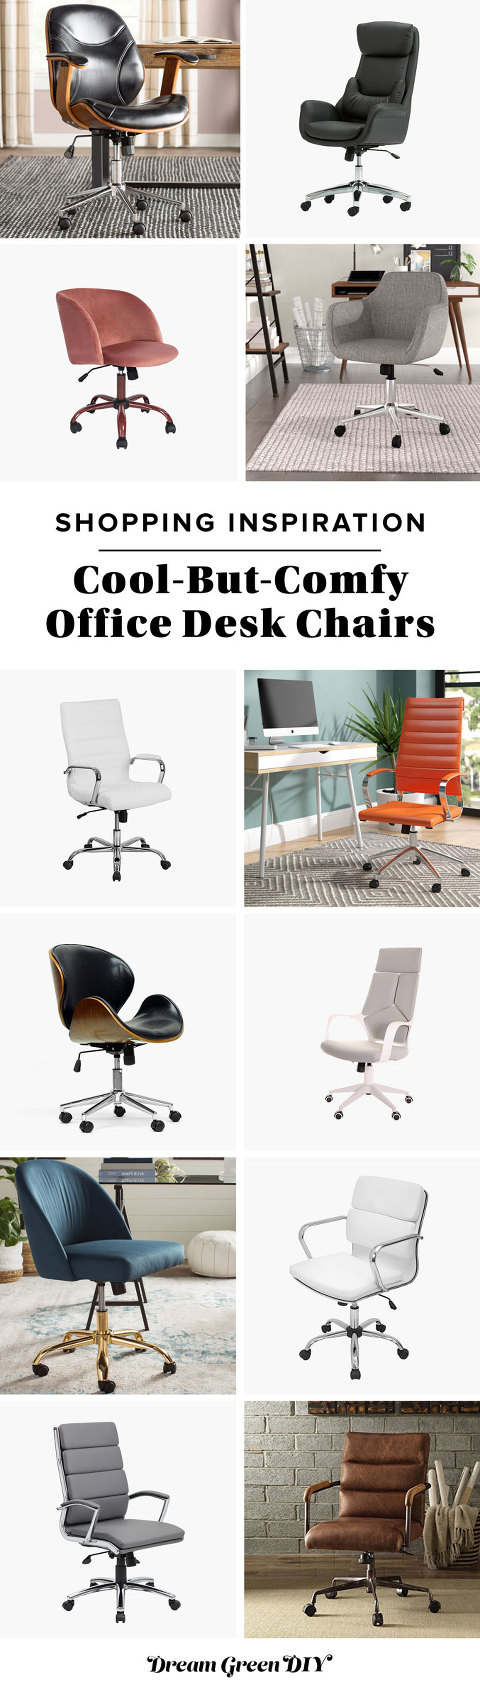 12 Cool-But-Comfy Office Desk Chairs